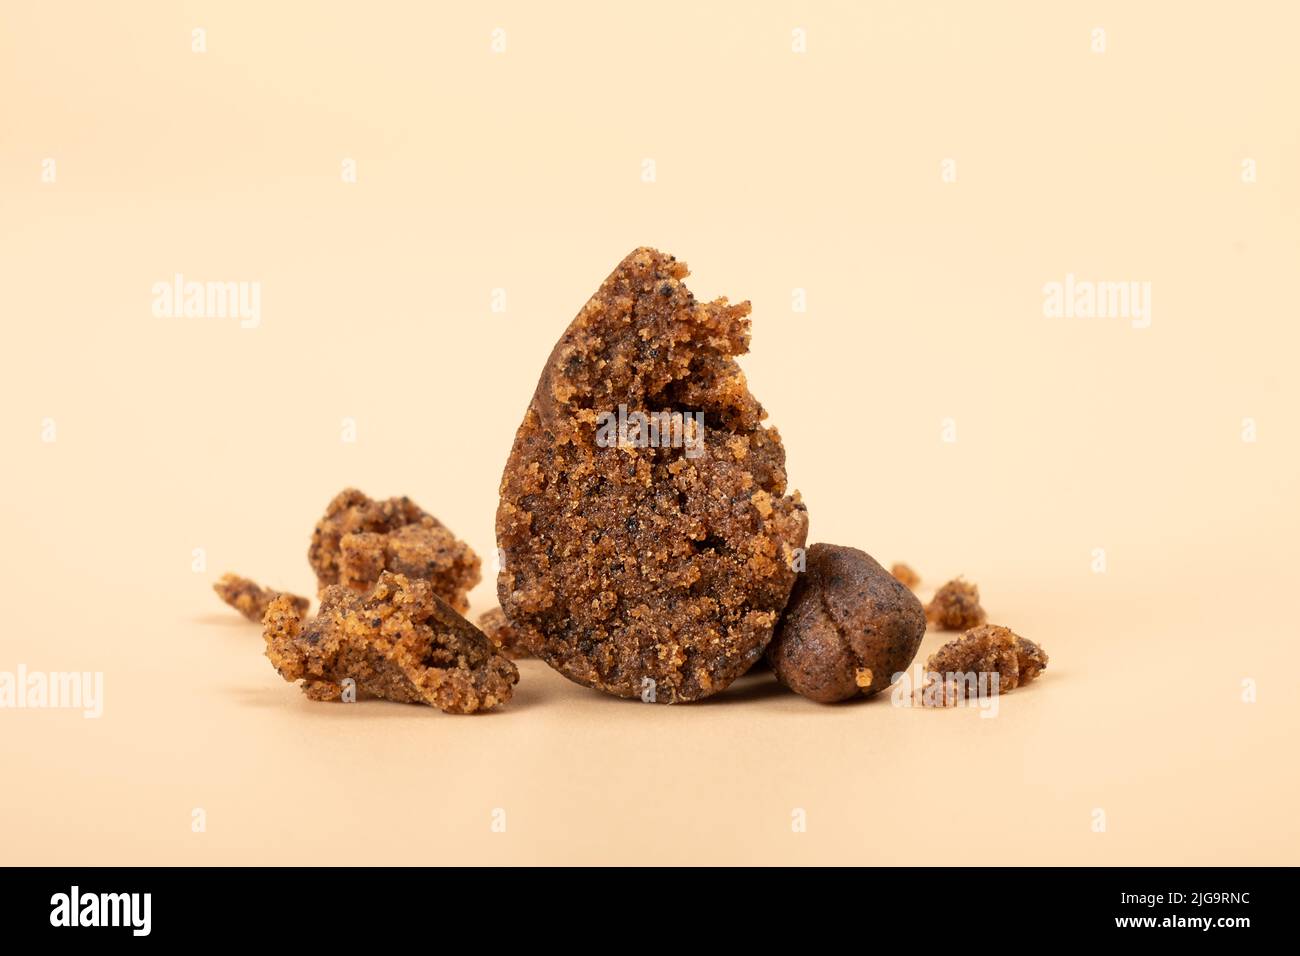 high thc extract, crumbled cannabis hashish slices on beige background. Stock Photo